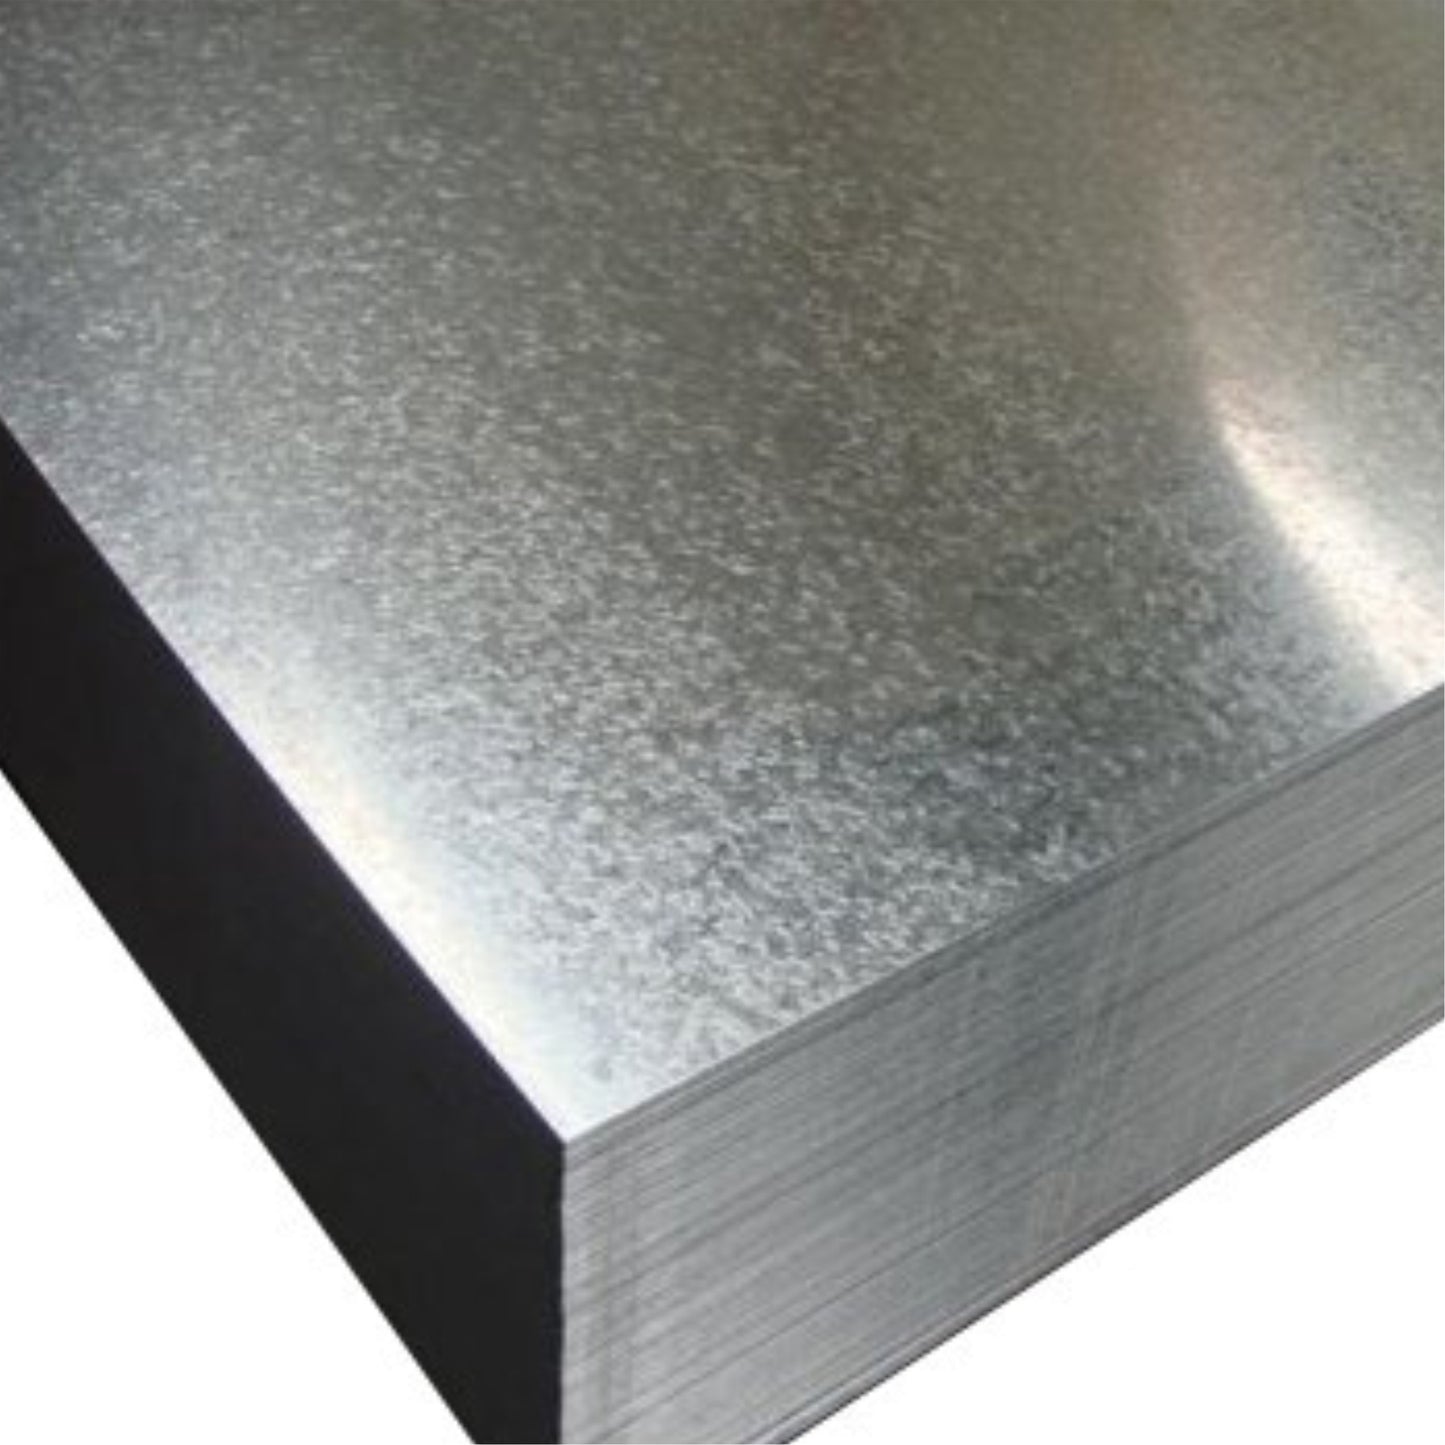 0.6mm GALVANISED SHEETS 2450x1225